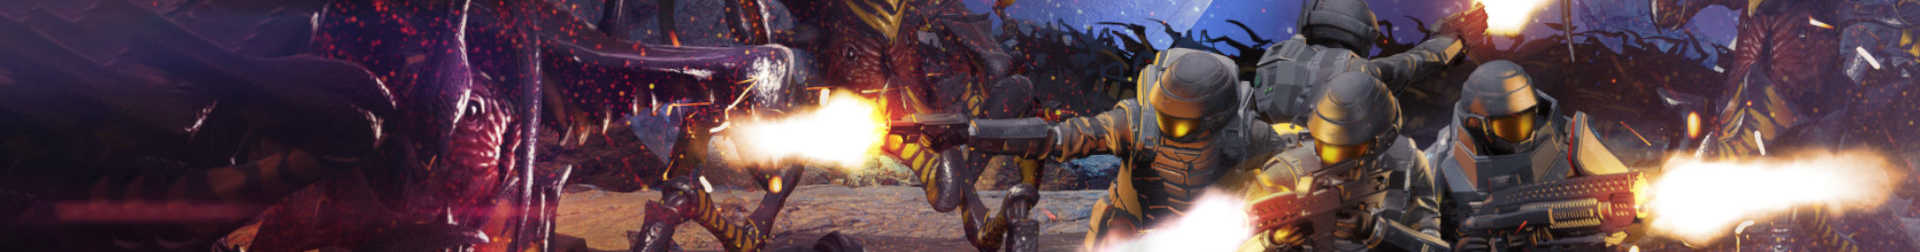 Starship Troopers Banner